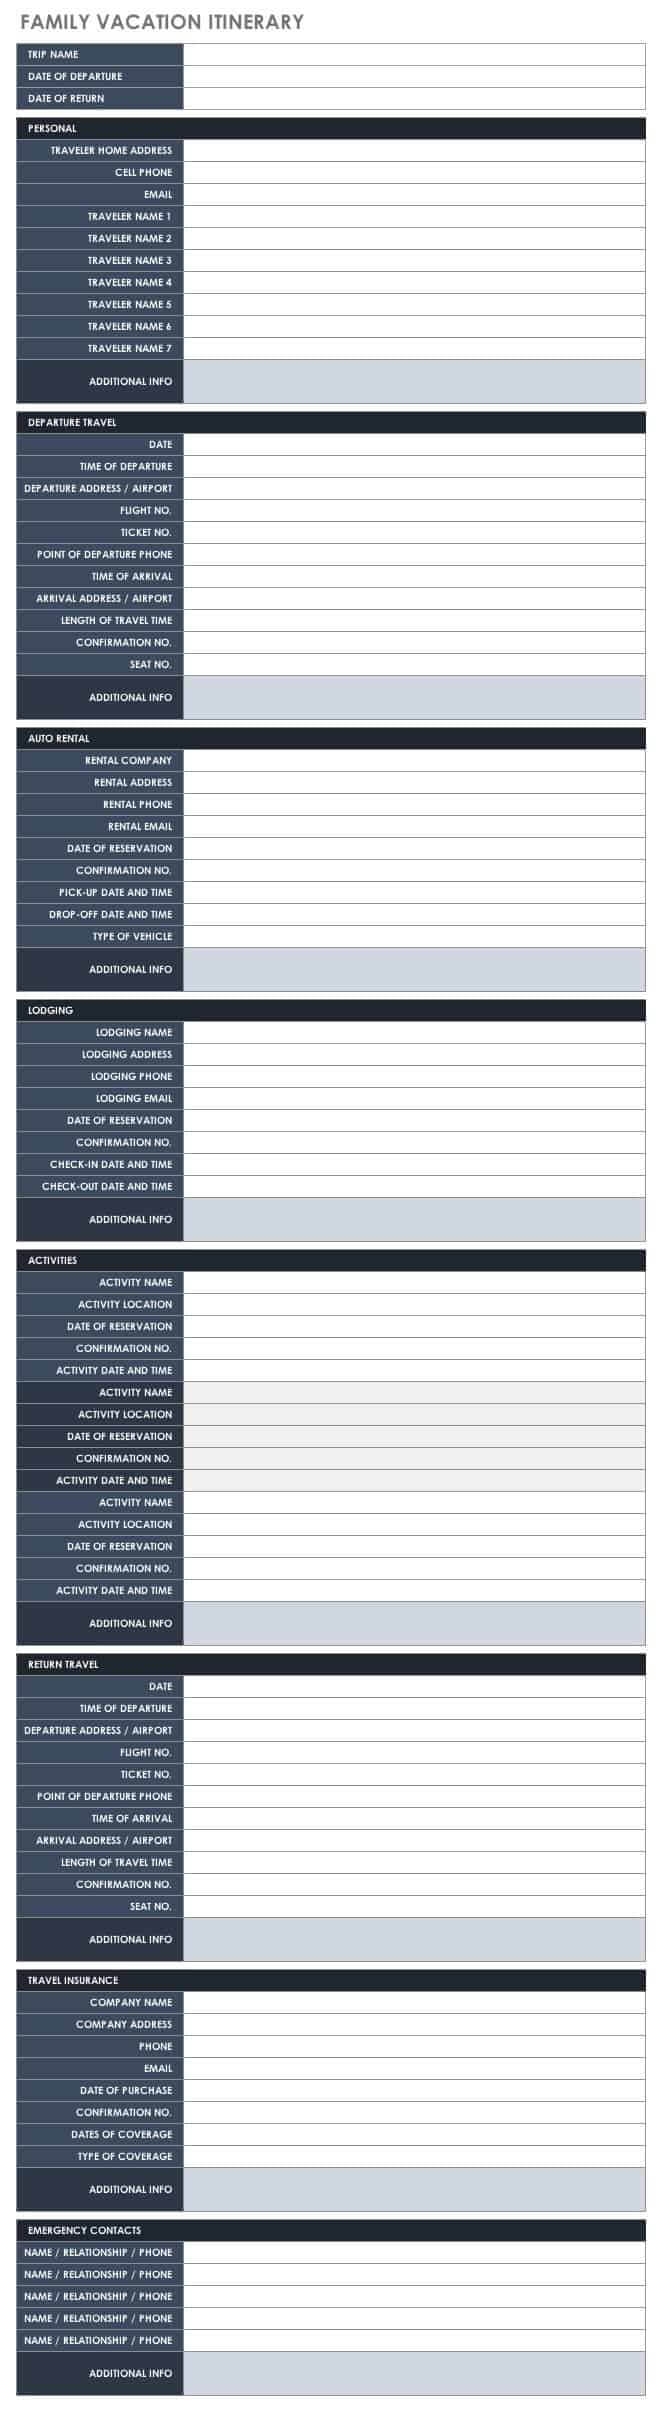 Free Itinerary Templates | Smartsheet Inside Business Travel Itinerary Template Word